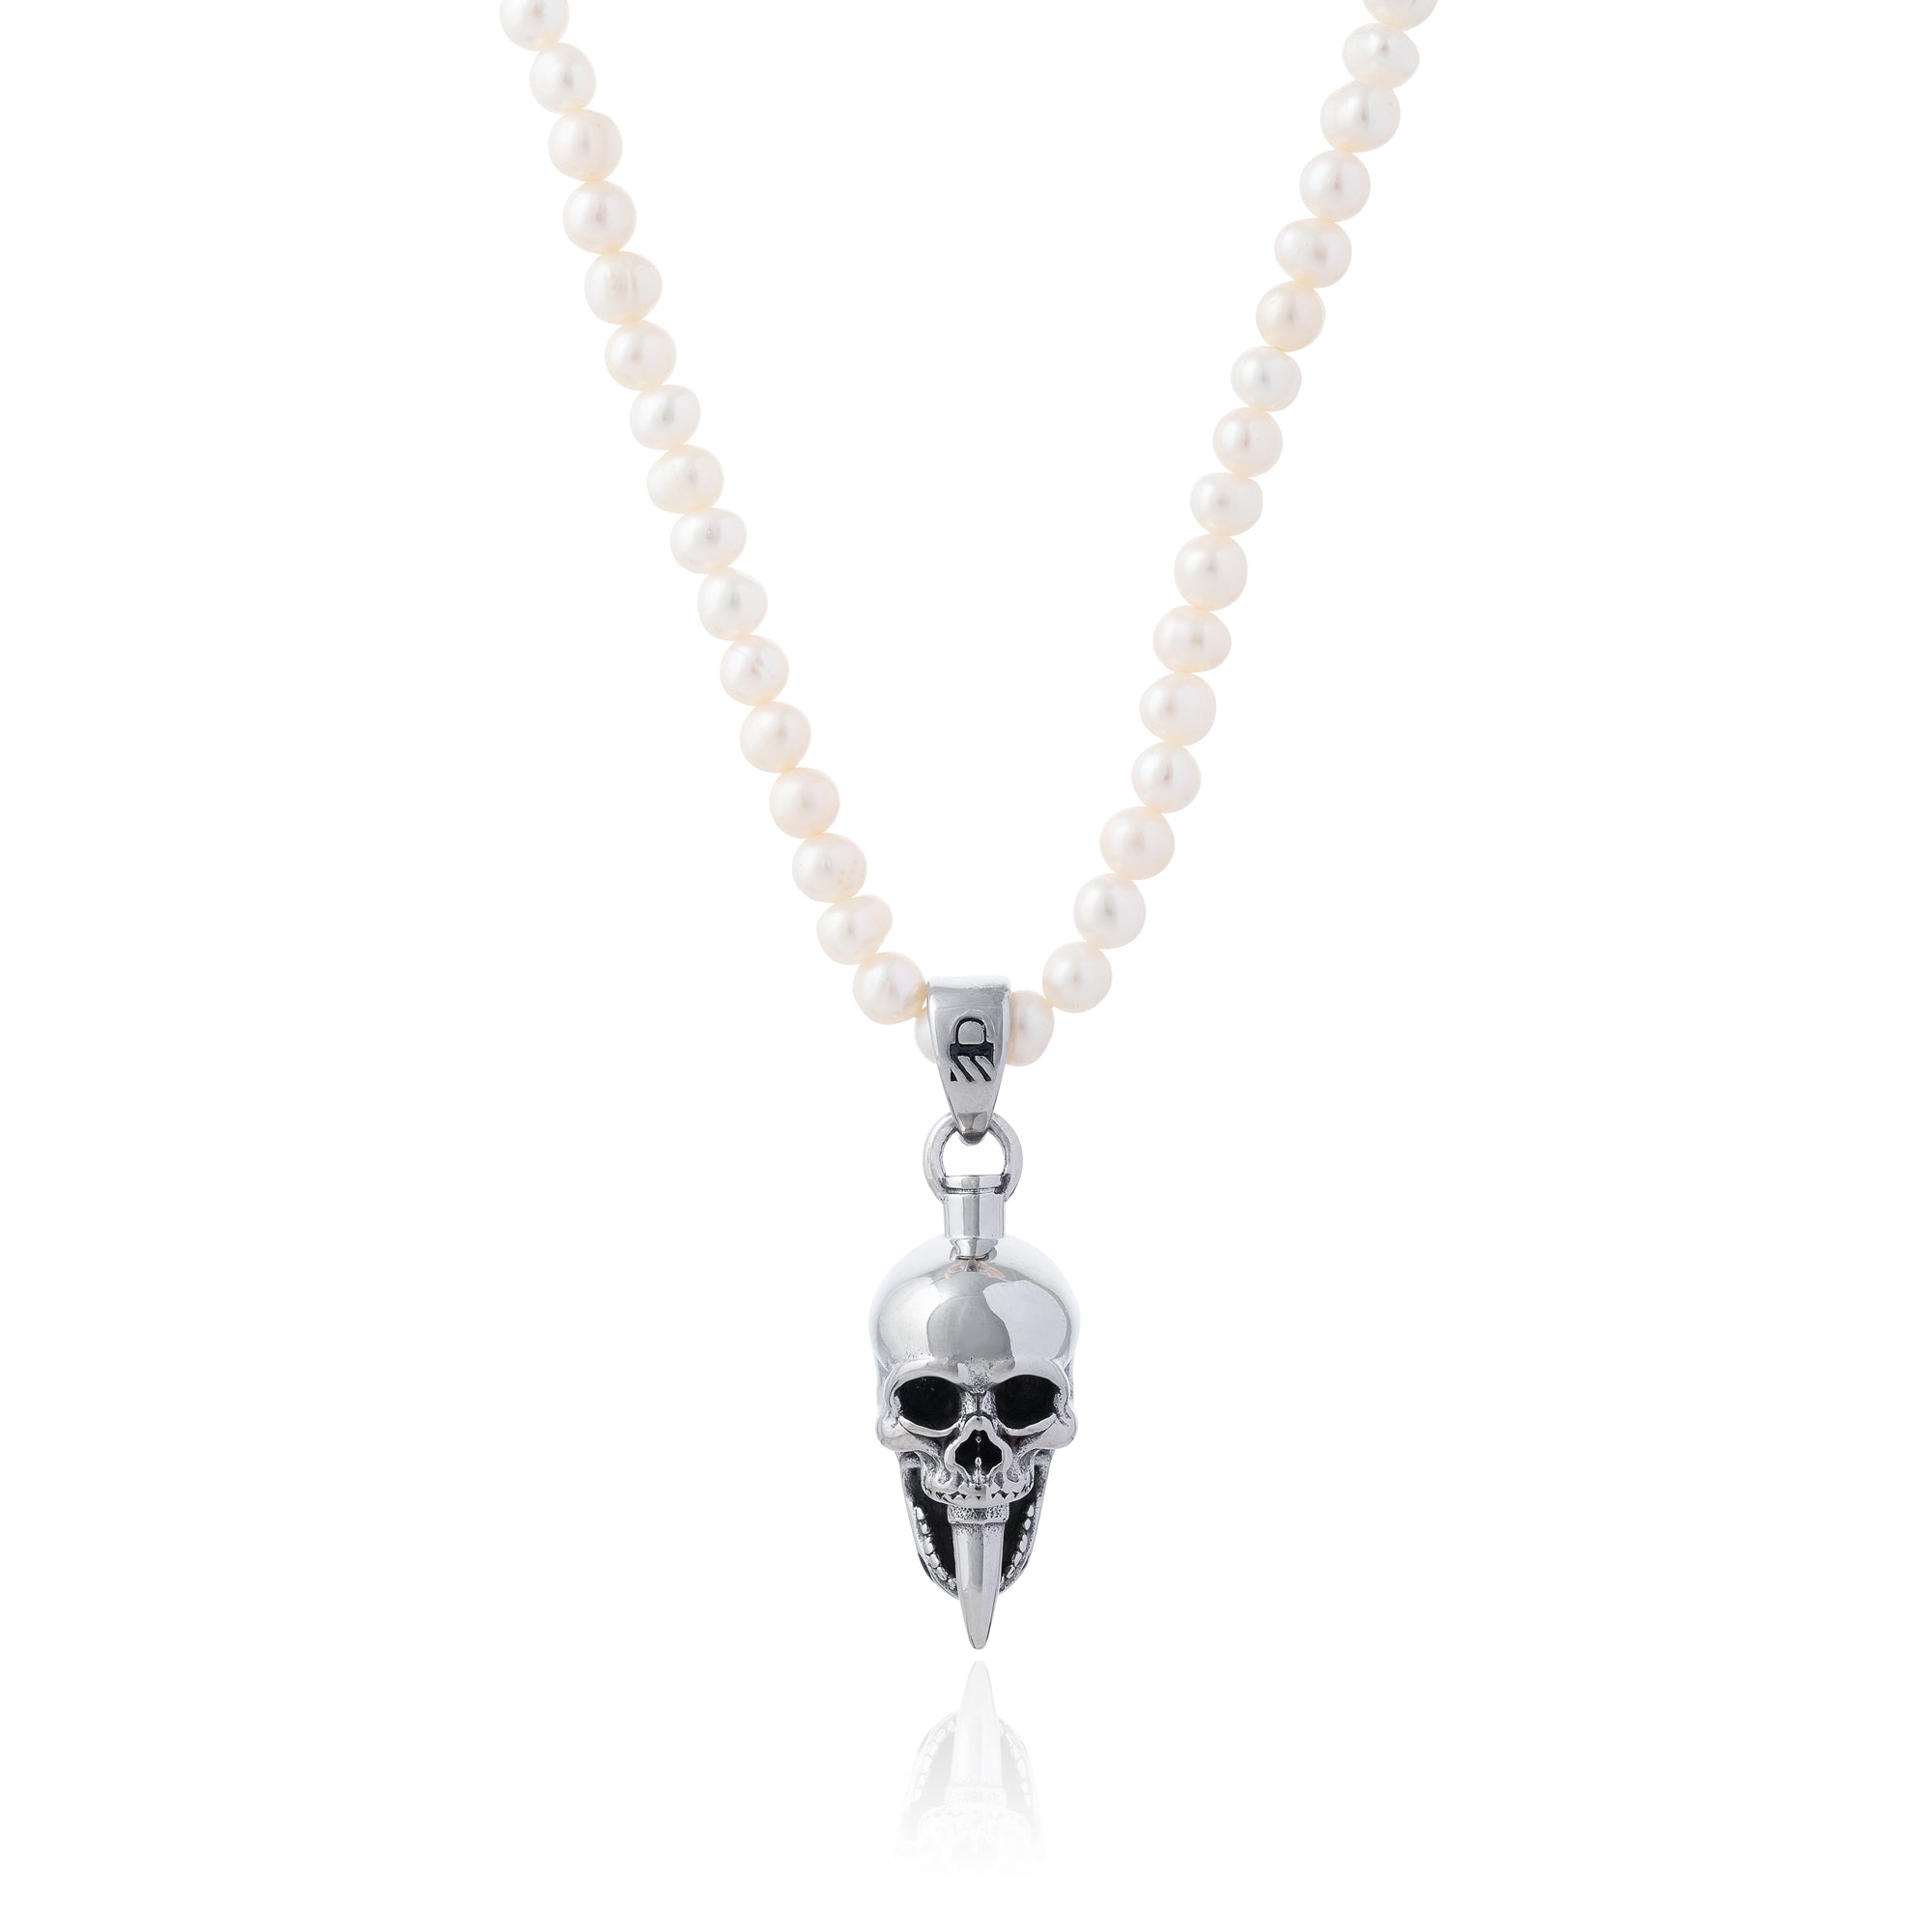 pearl necklace with skull pendant